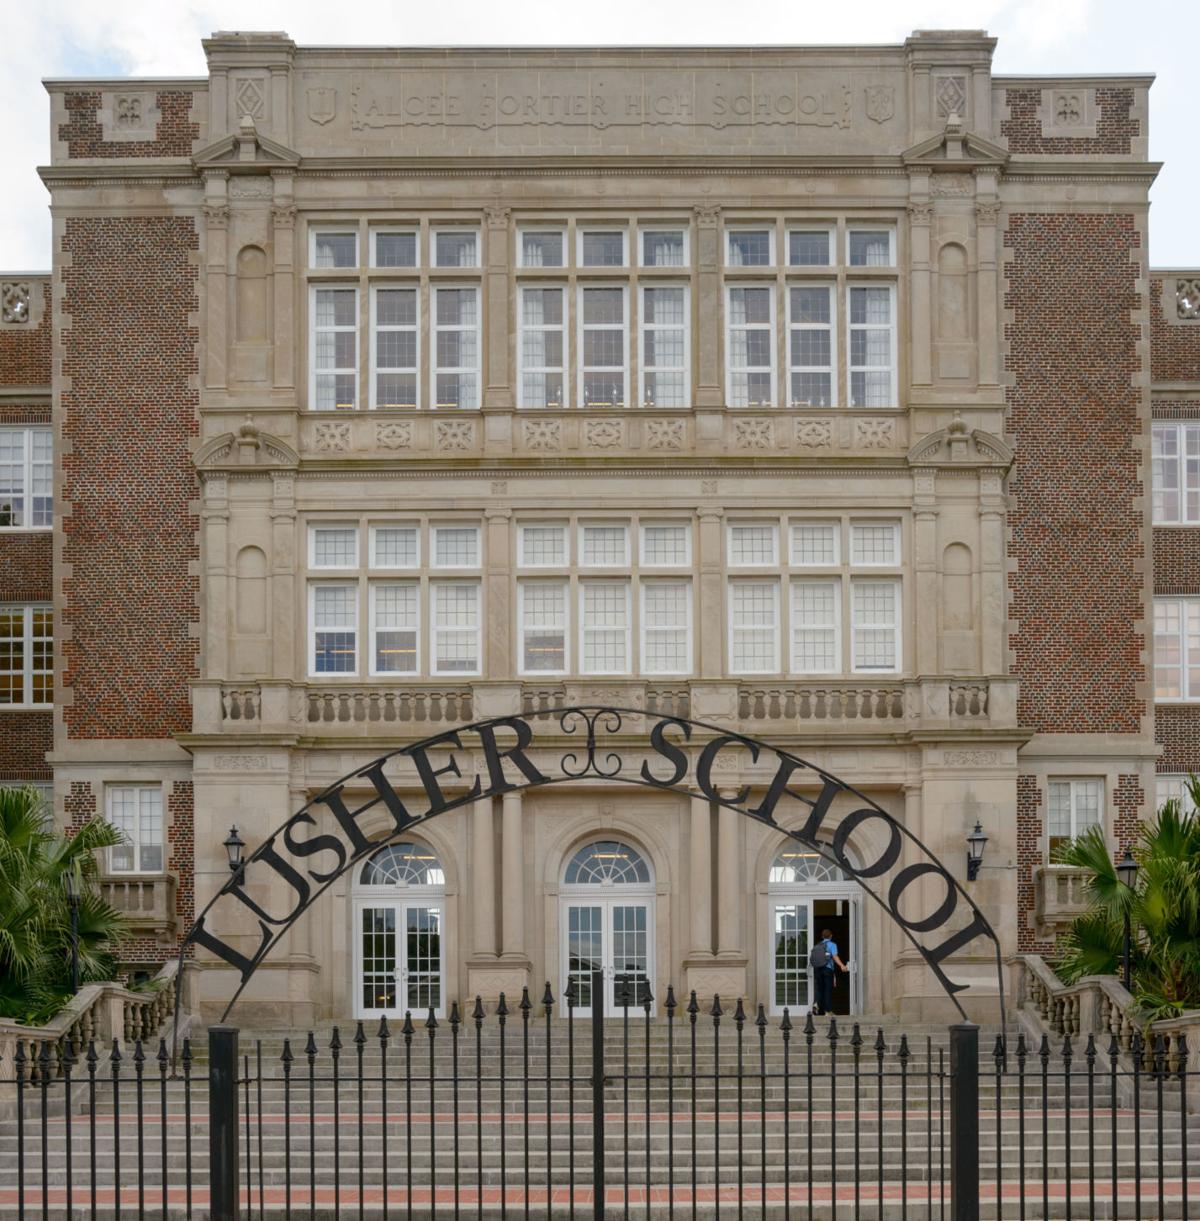 Lusher officials plan renovations ahead of 2021 expansion to nearby Sci